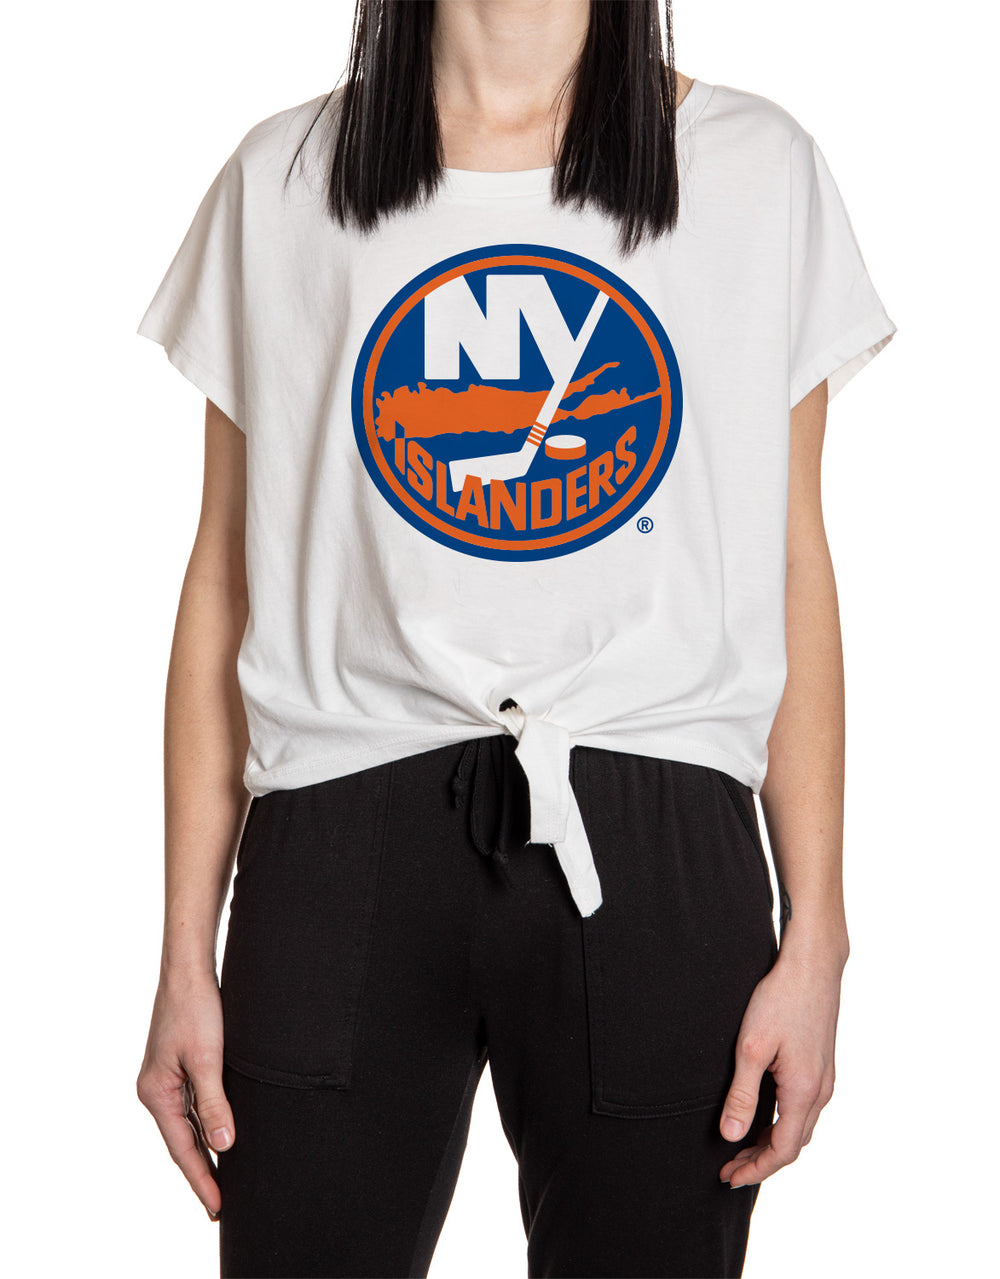 New York Islanders NHL Special Design Jersey With Your Ribs For Halloween  Hoodie T Shirt - Growkoc